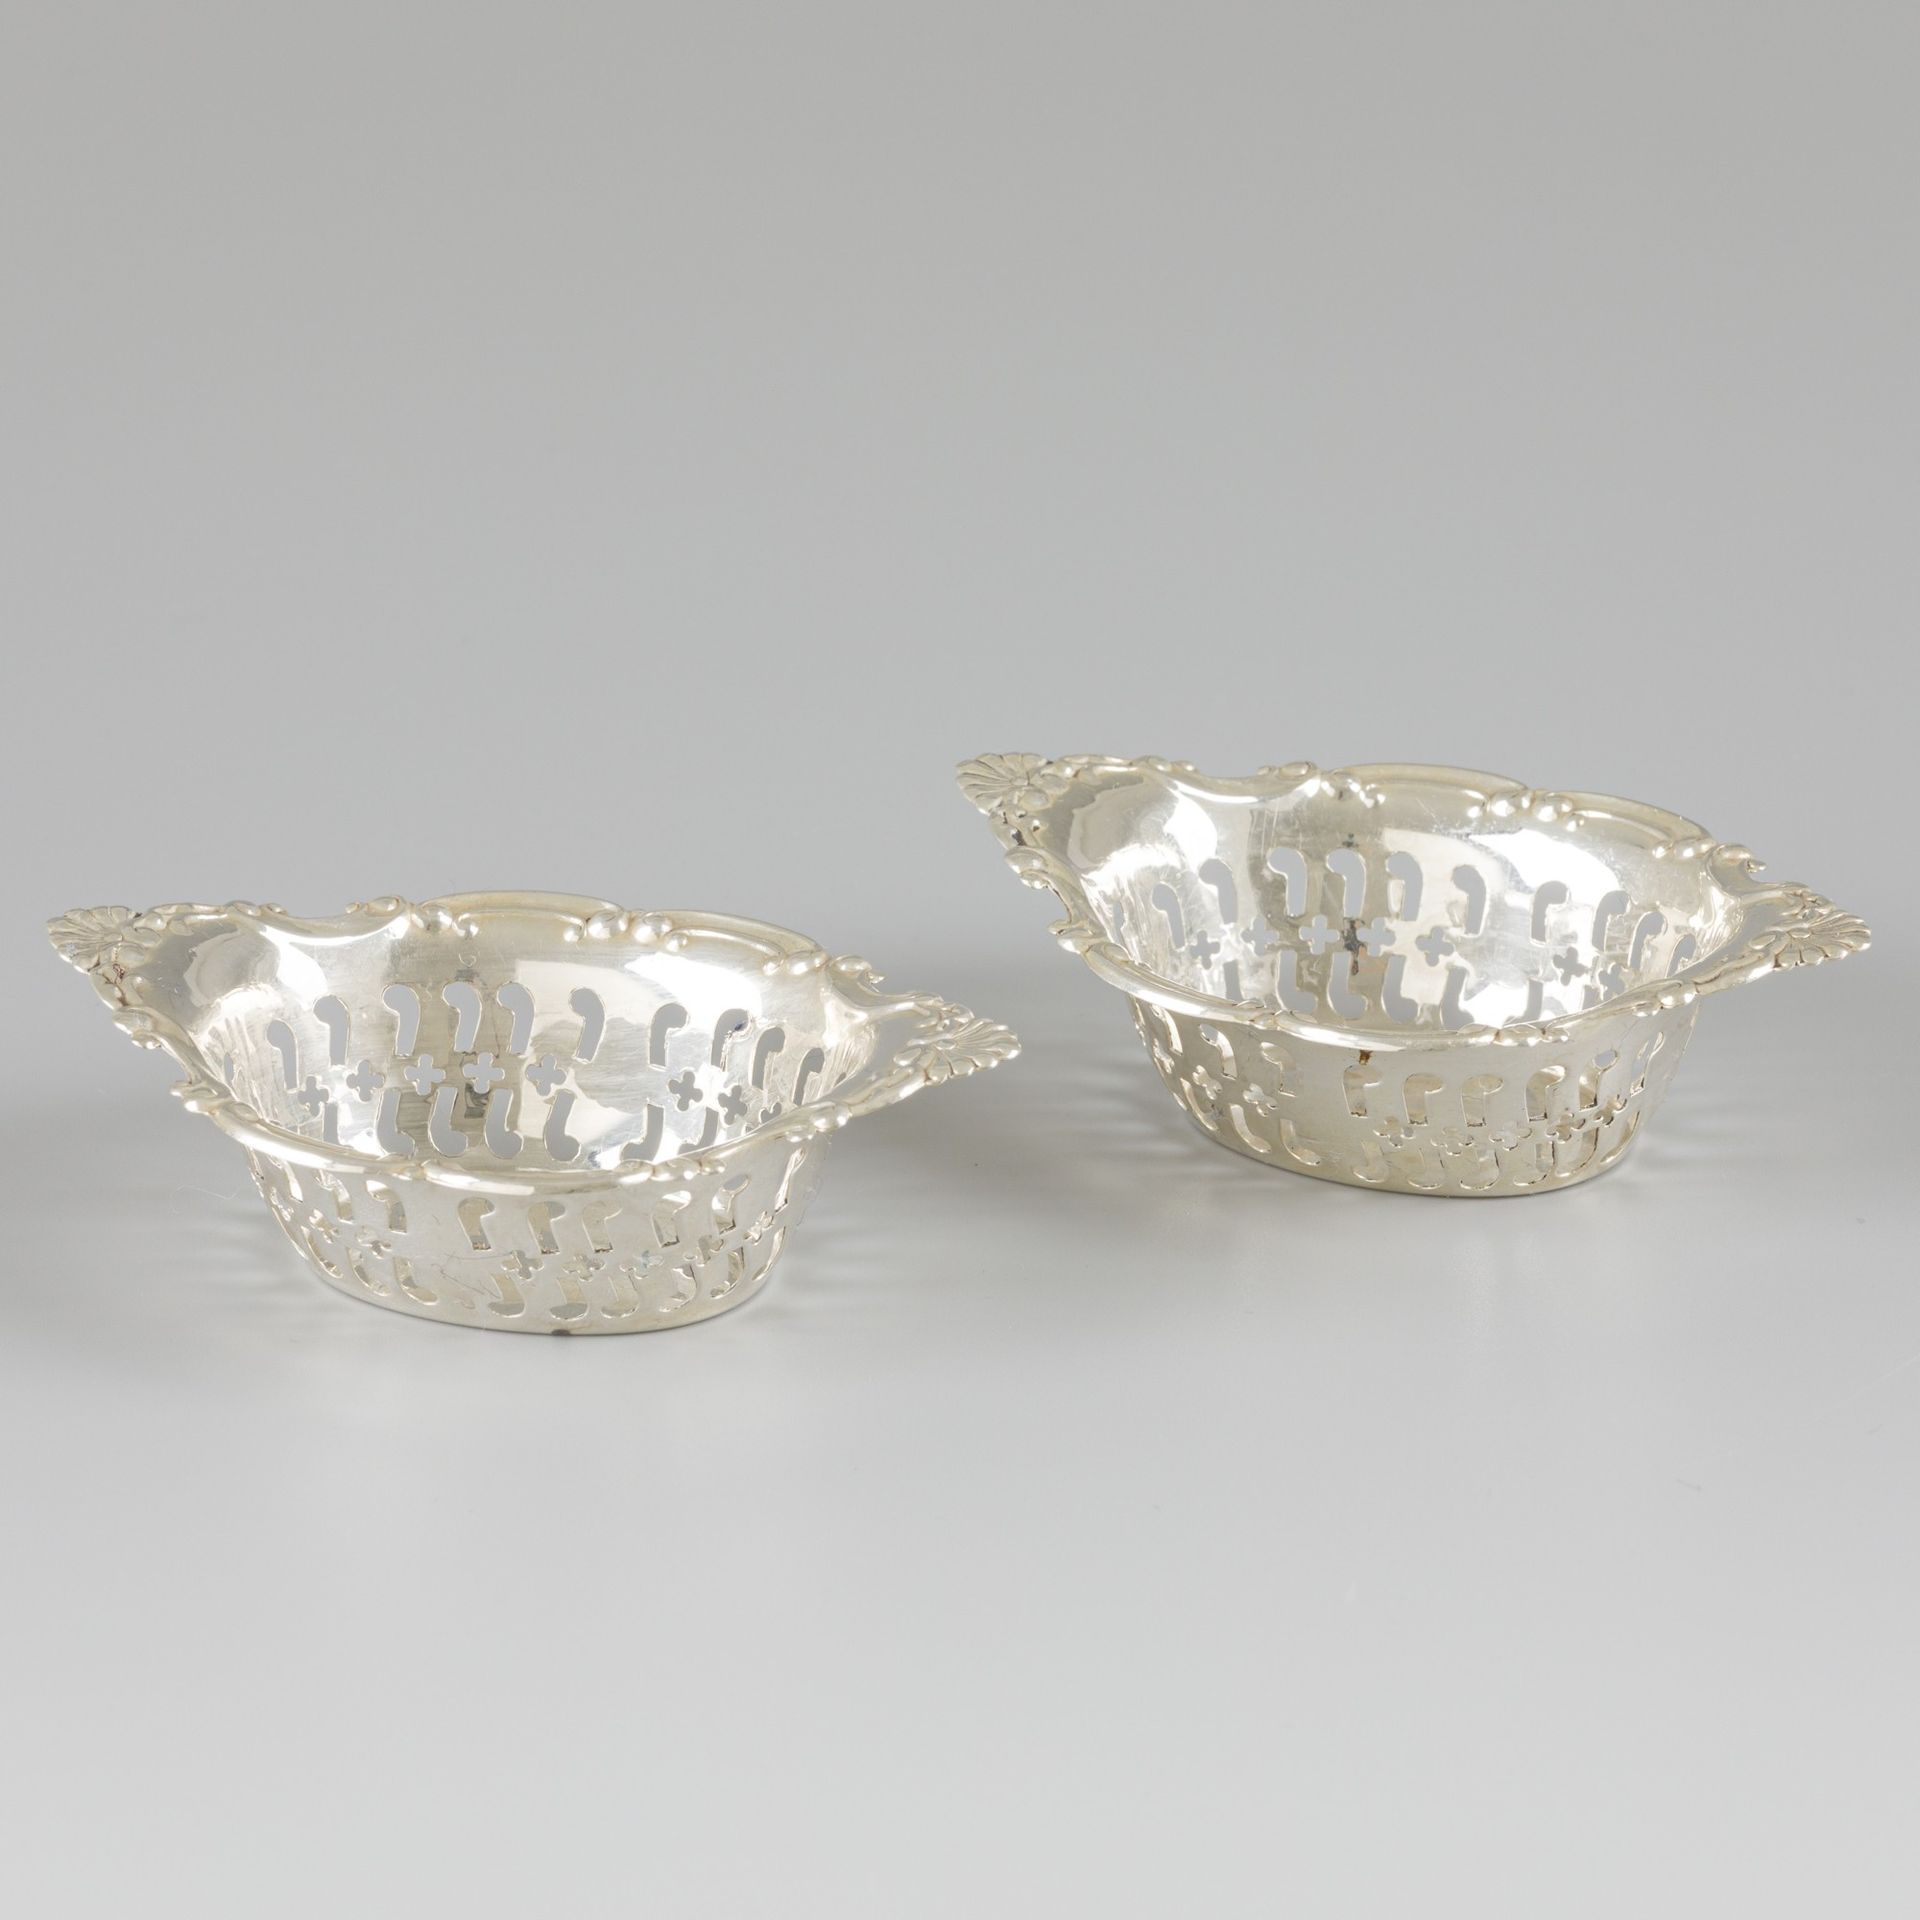 2-piece set of pastille / lozenge baskets silver. Boat-shaped, with scalloped ri&hellip;